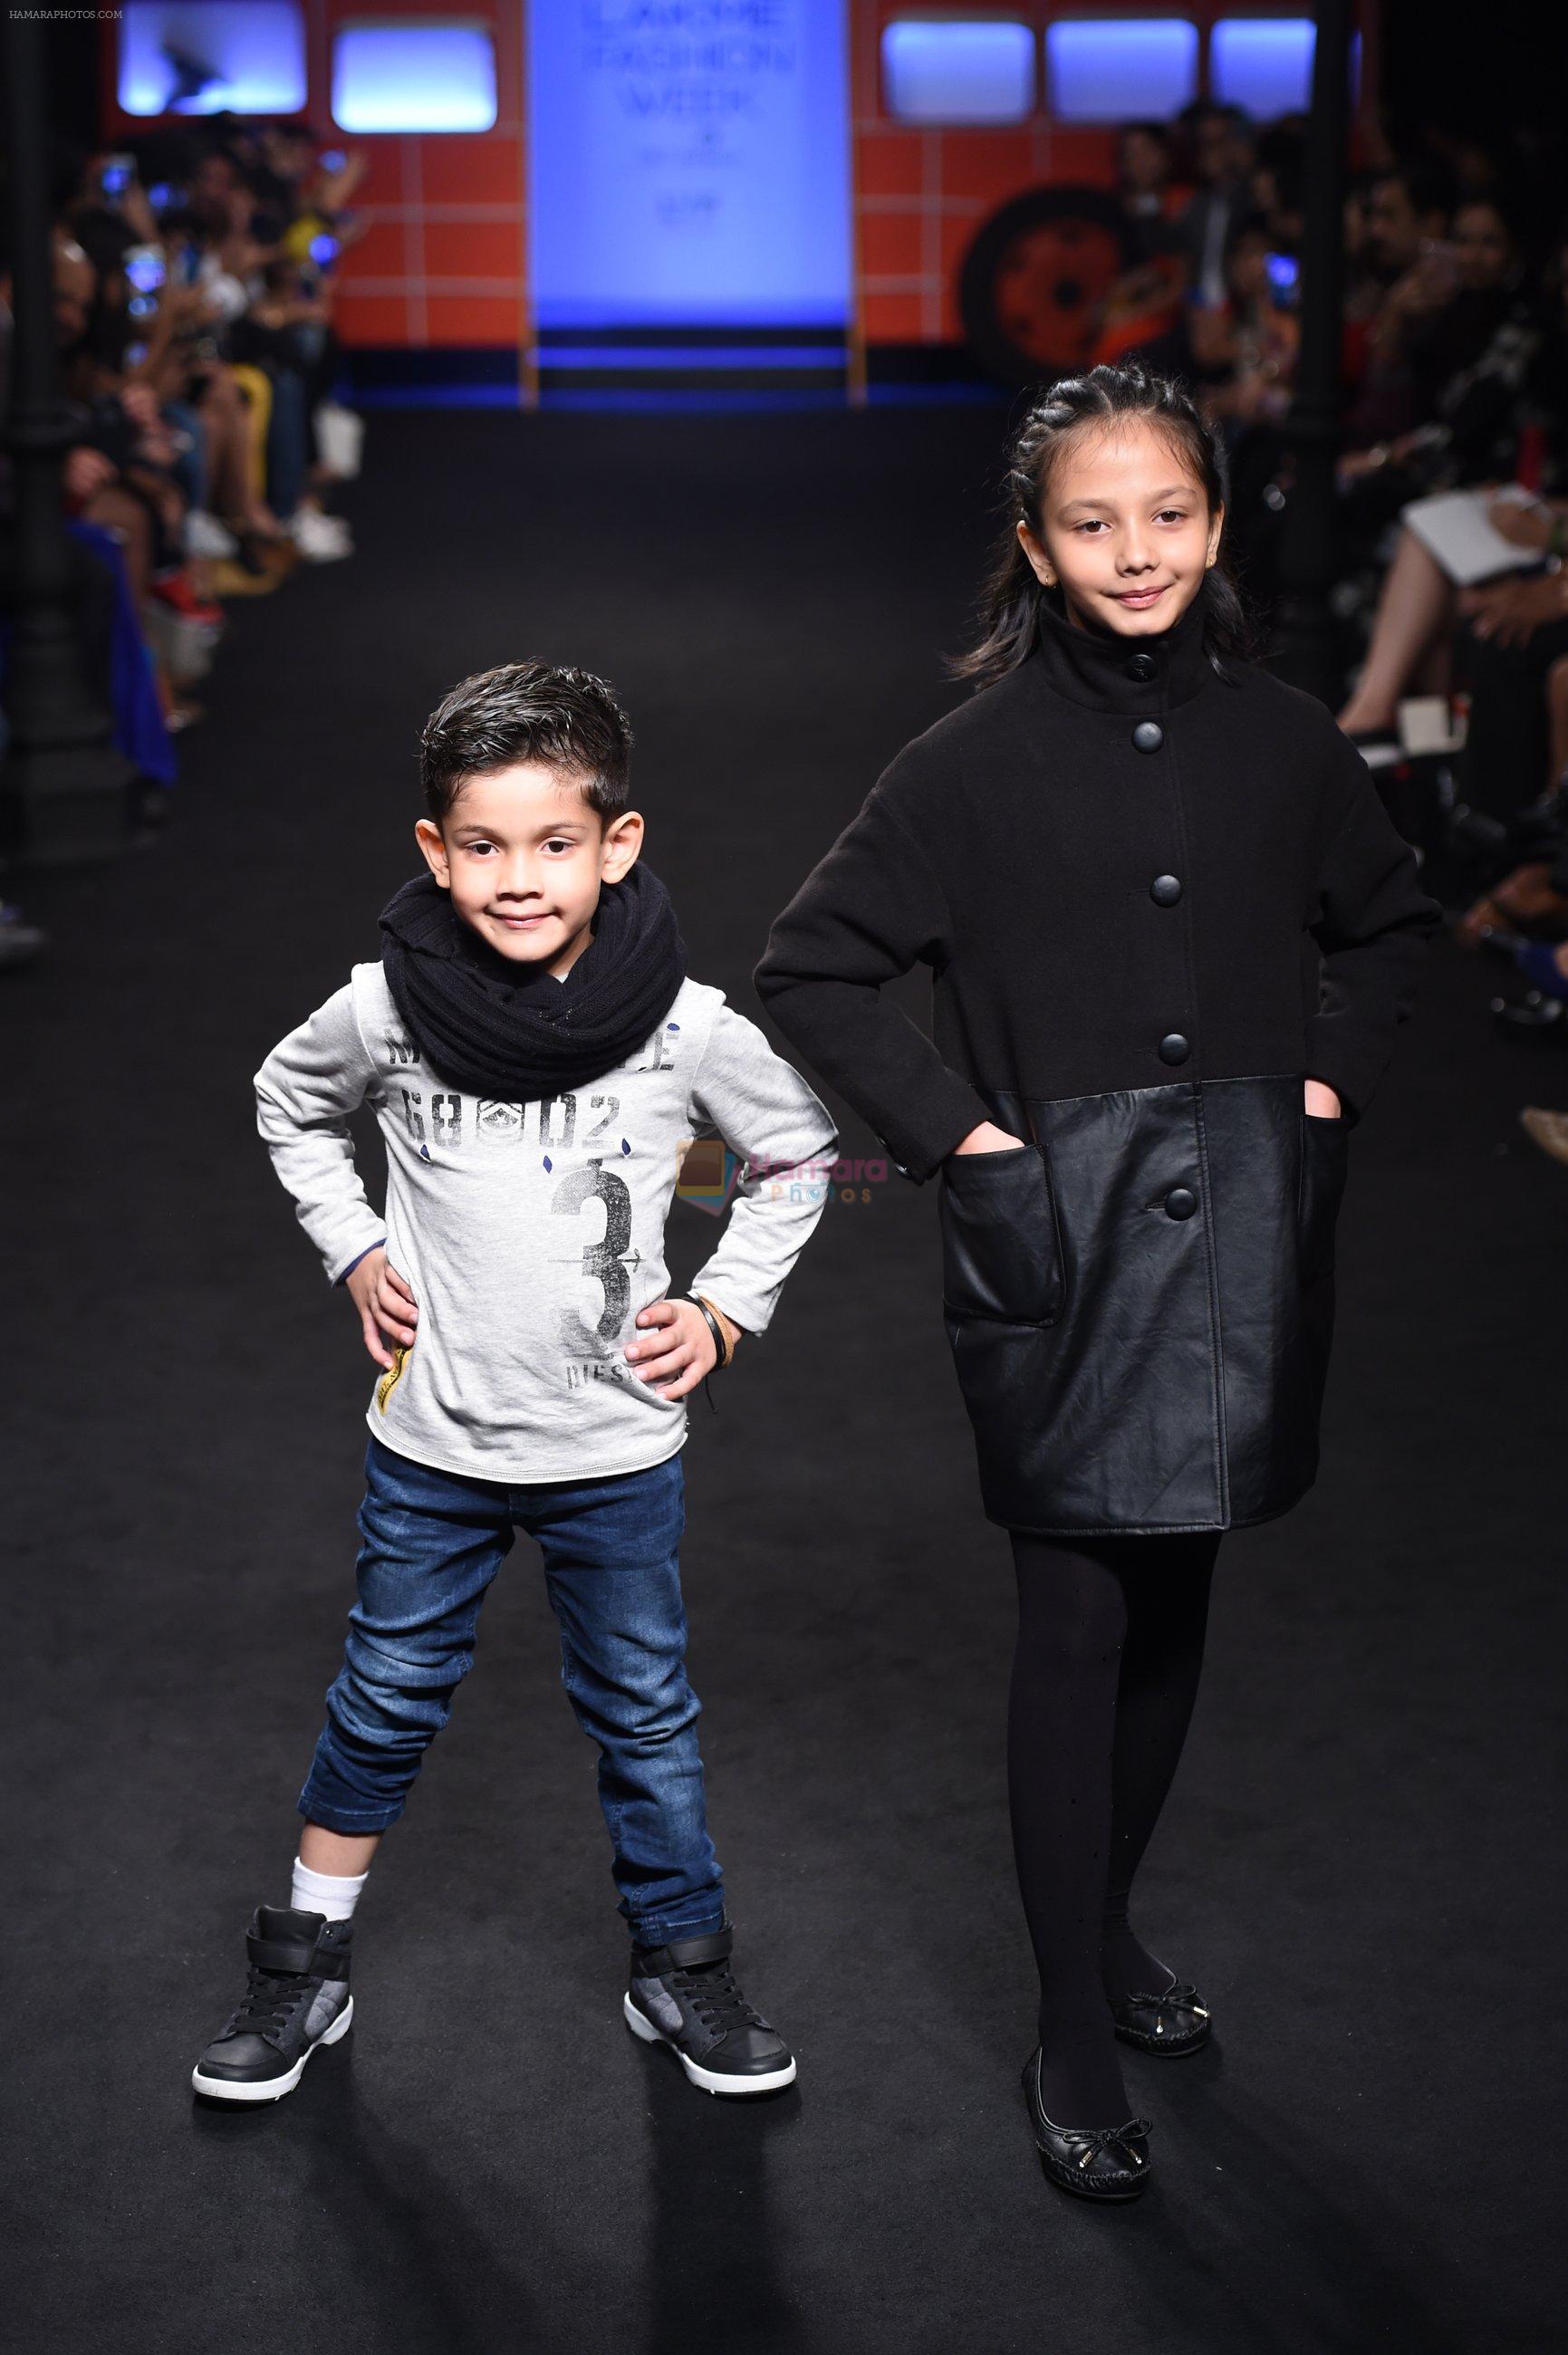 Model walk the ramp for The Hamleys Show styled by Diesel Show at Lakme Fashion Week 2016 on 28th Aug 2016